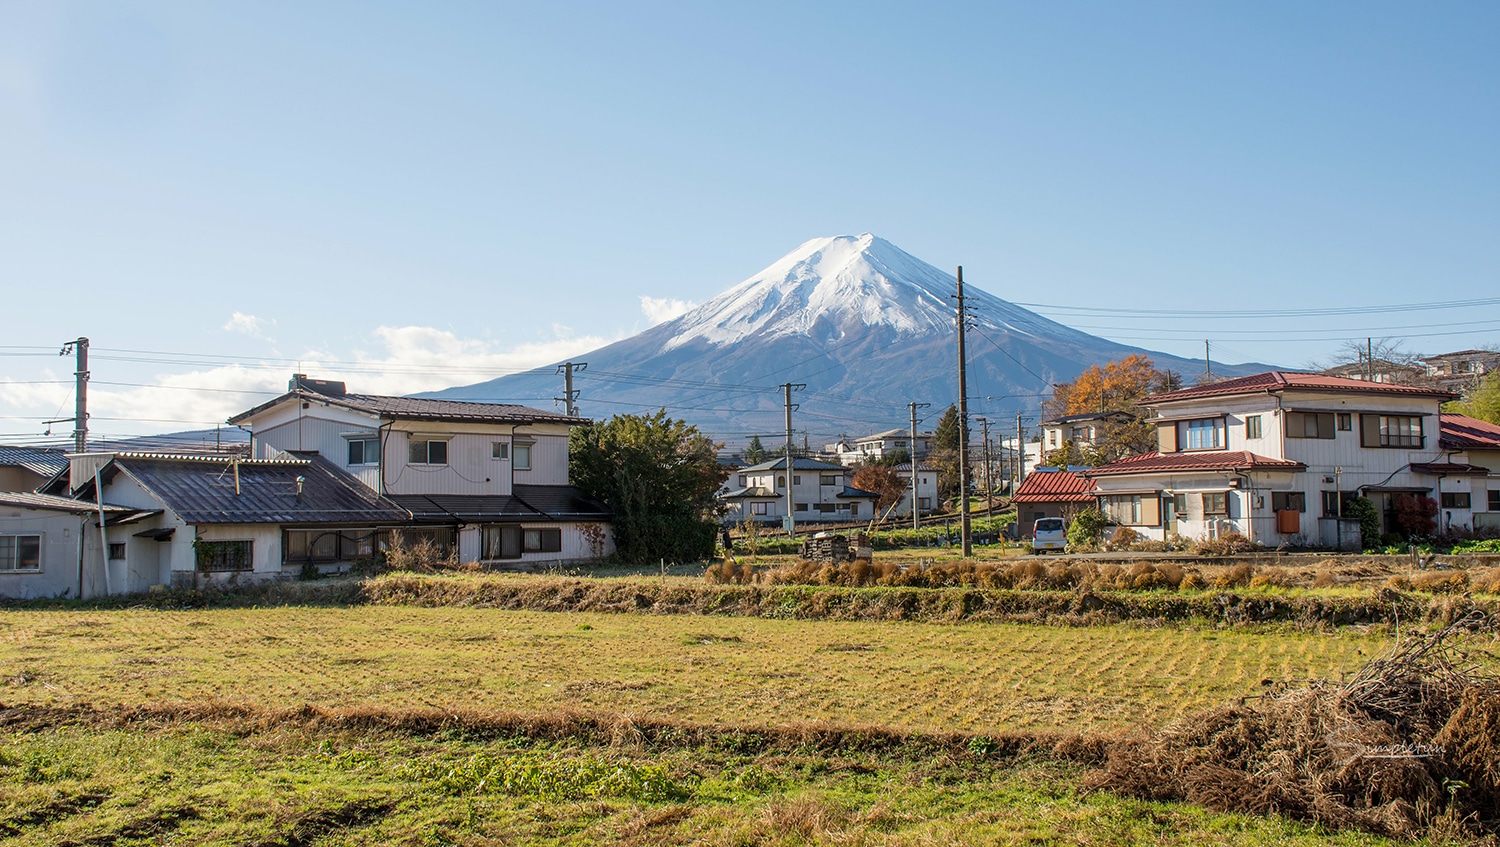 Japanese country houses and a rice paddy near Mt Fuji